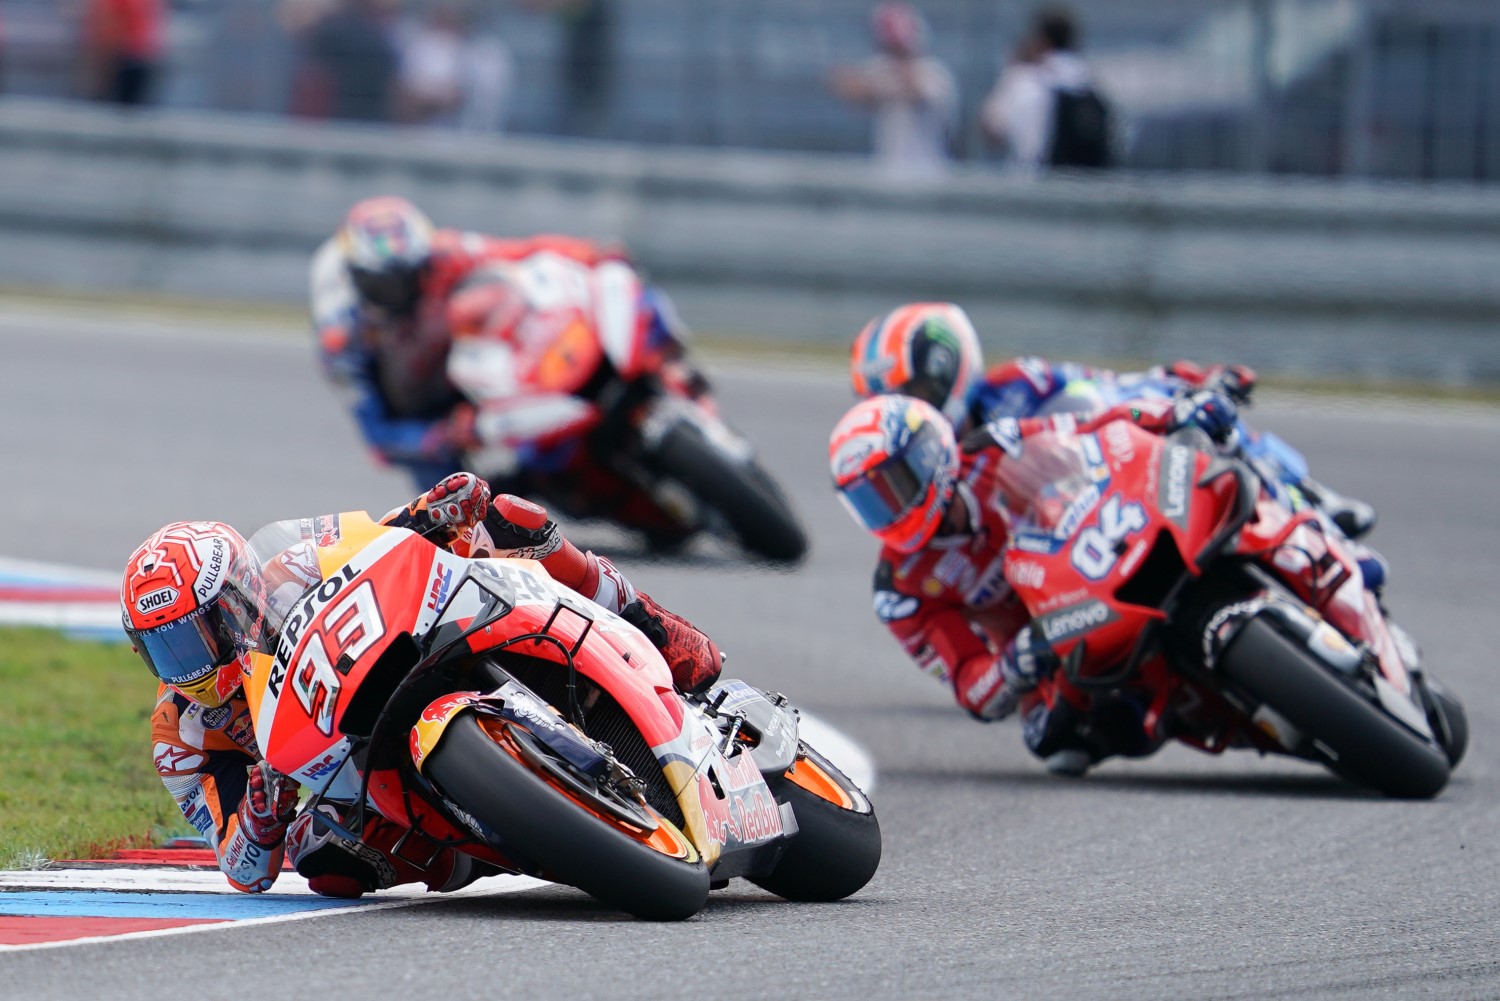 Marc Marquez is so good he buries not only his competitors, buts also his teammates